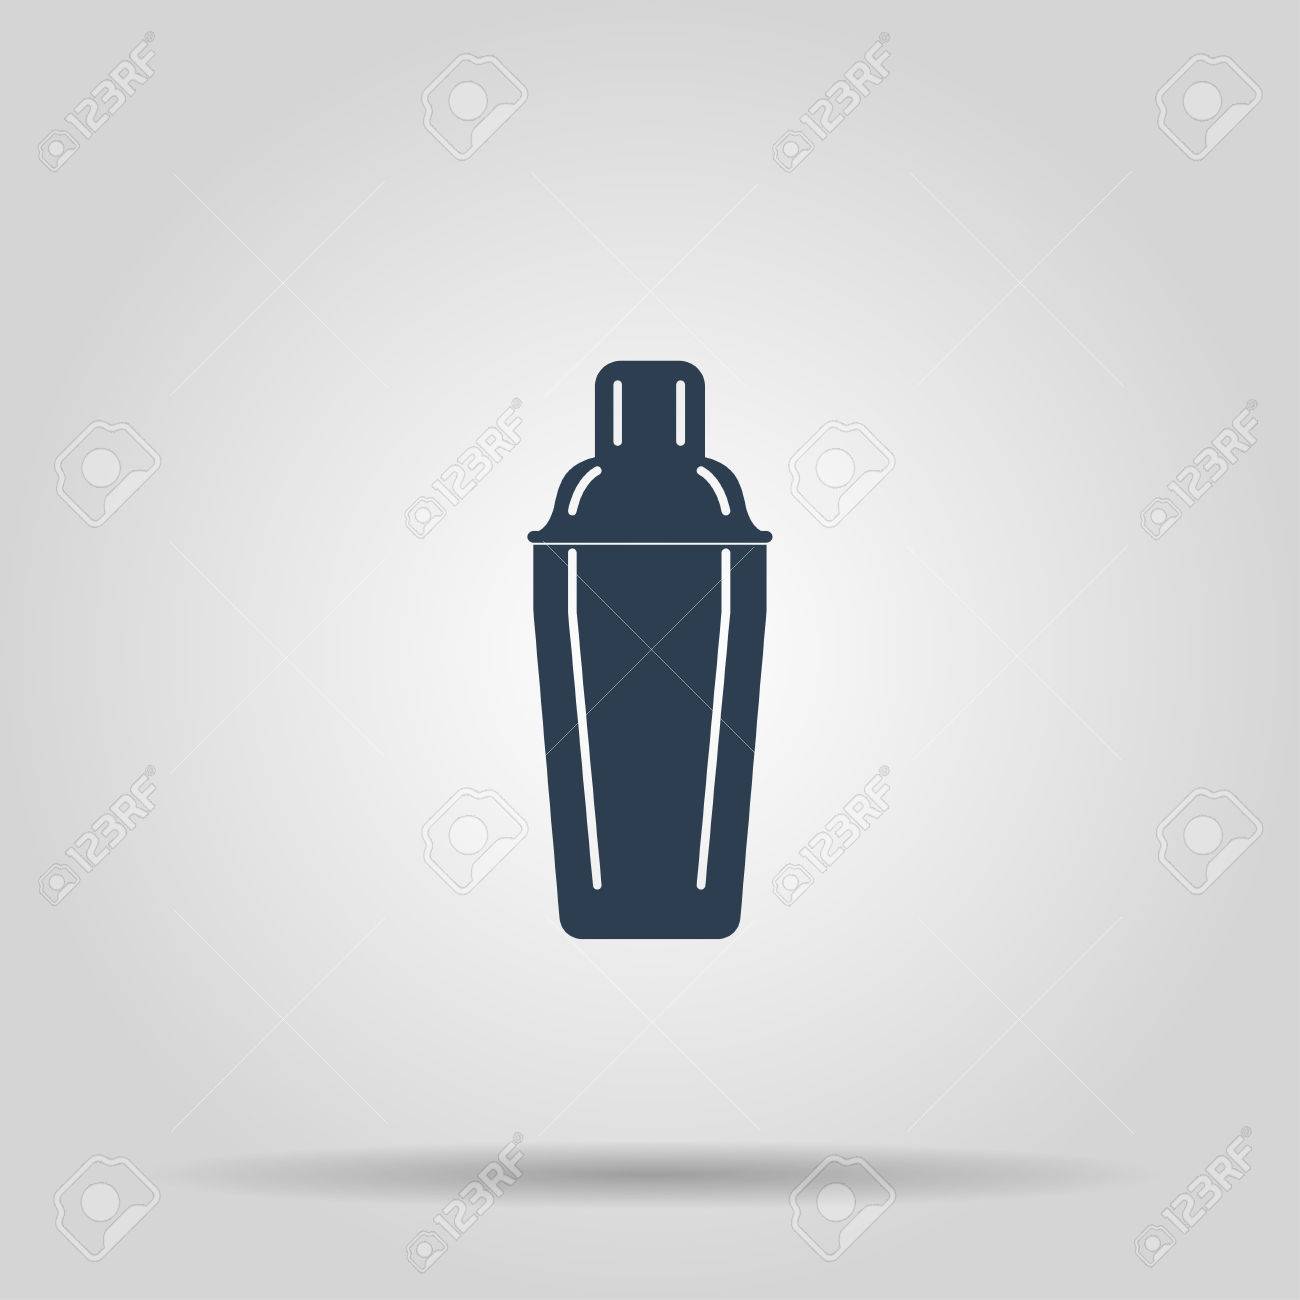 Sugar Shaker Icon Flat Graphic Design Vector Art | Getty Images